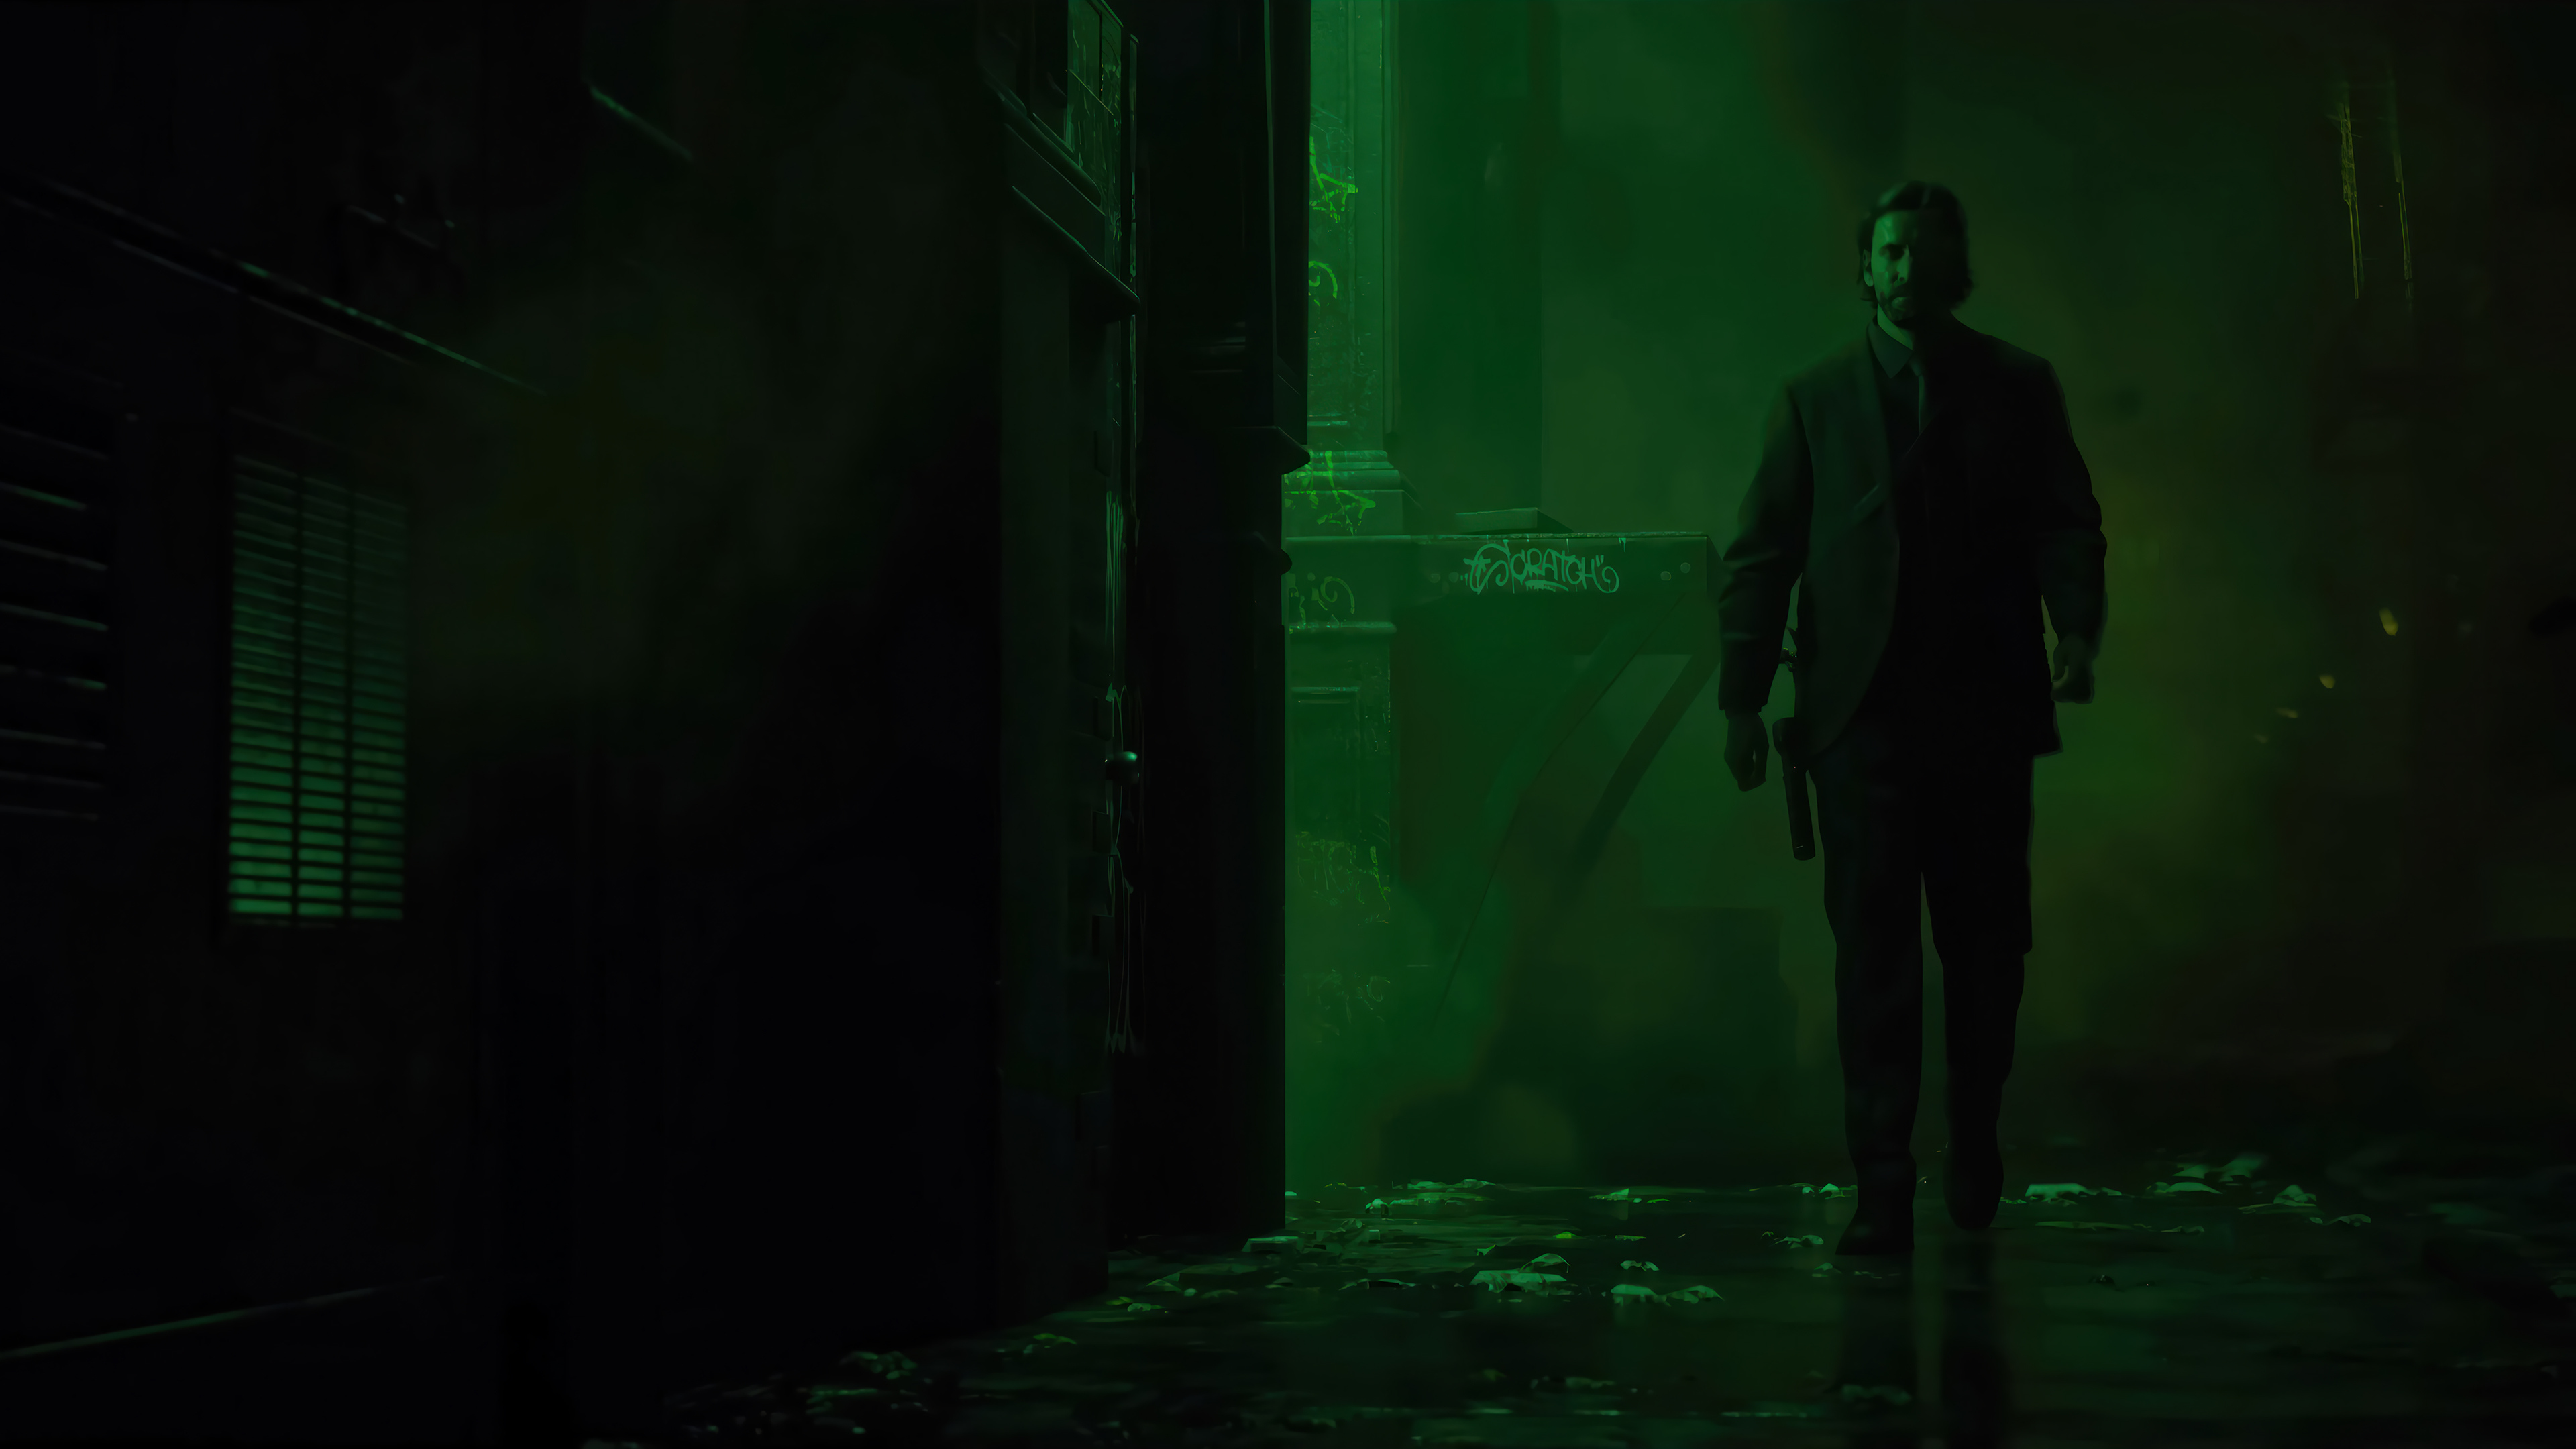 HD desktop wallpaper of Alan Wake 2 showcasing the game's protagonist walking through a dark, eerie alley illuminated by a mysterious green light, perfect for fans and gamers.